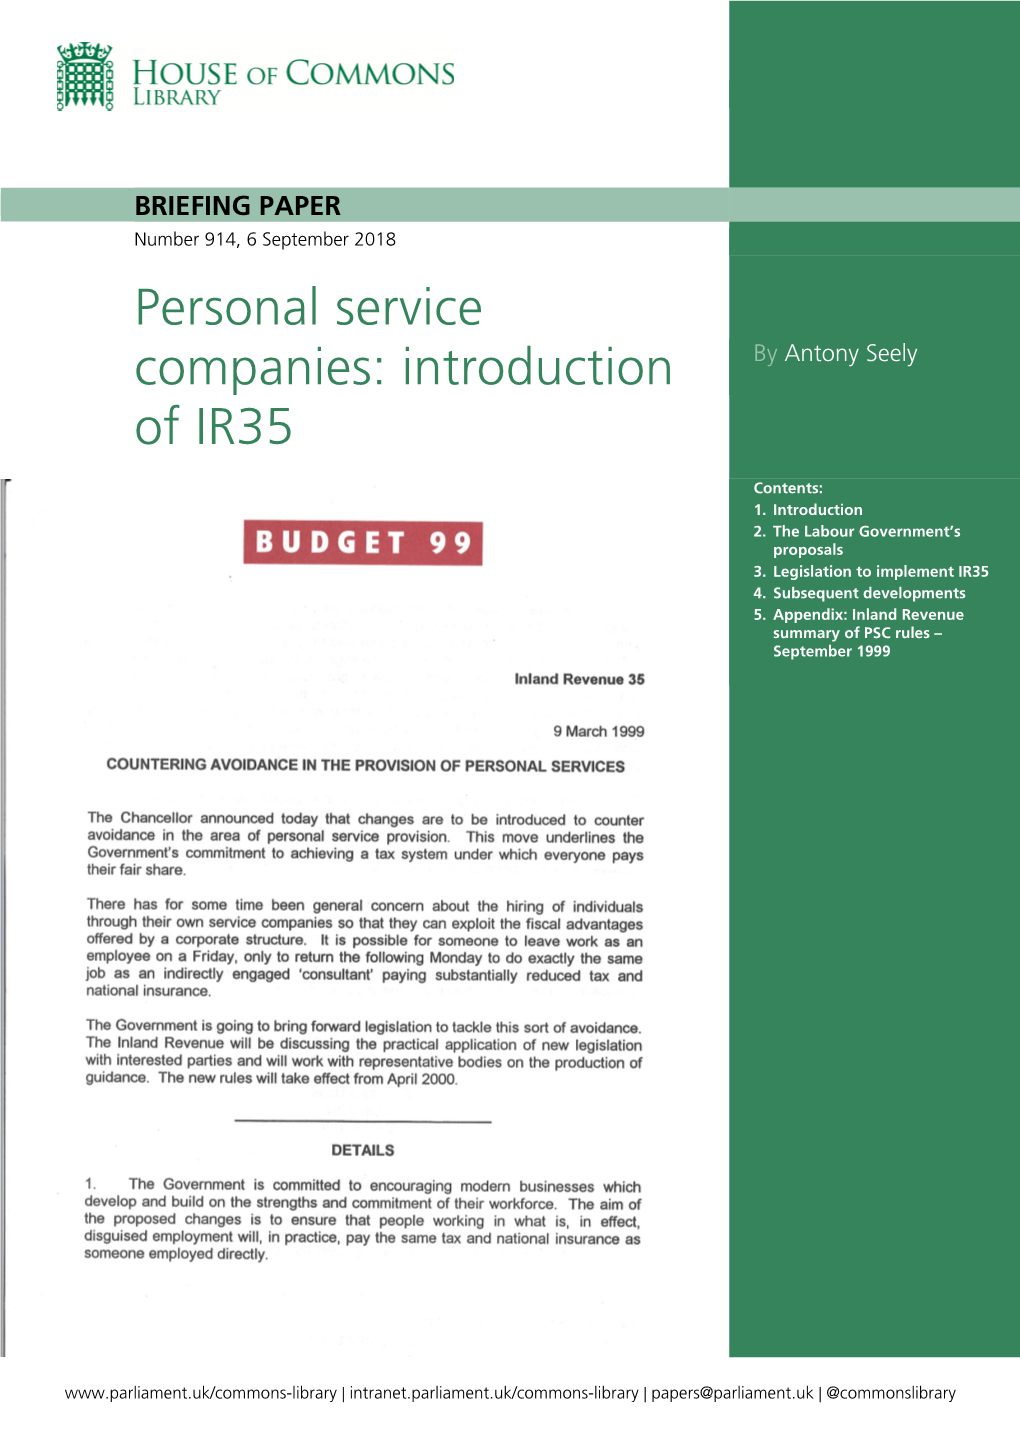 Personal Service Companies: Introduction of IR35